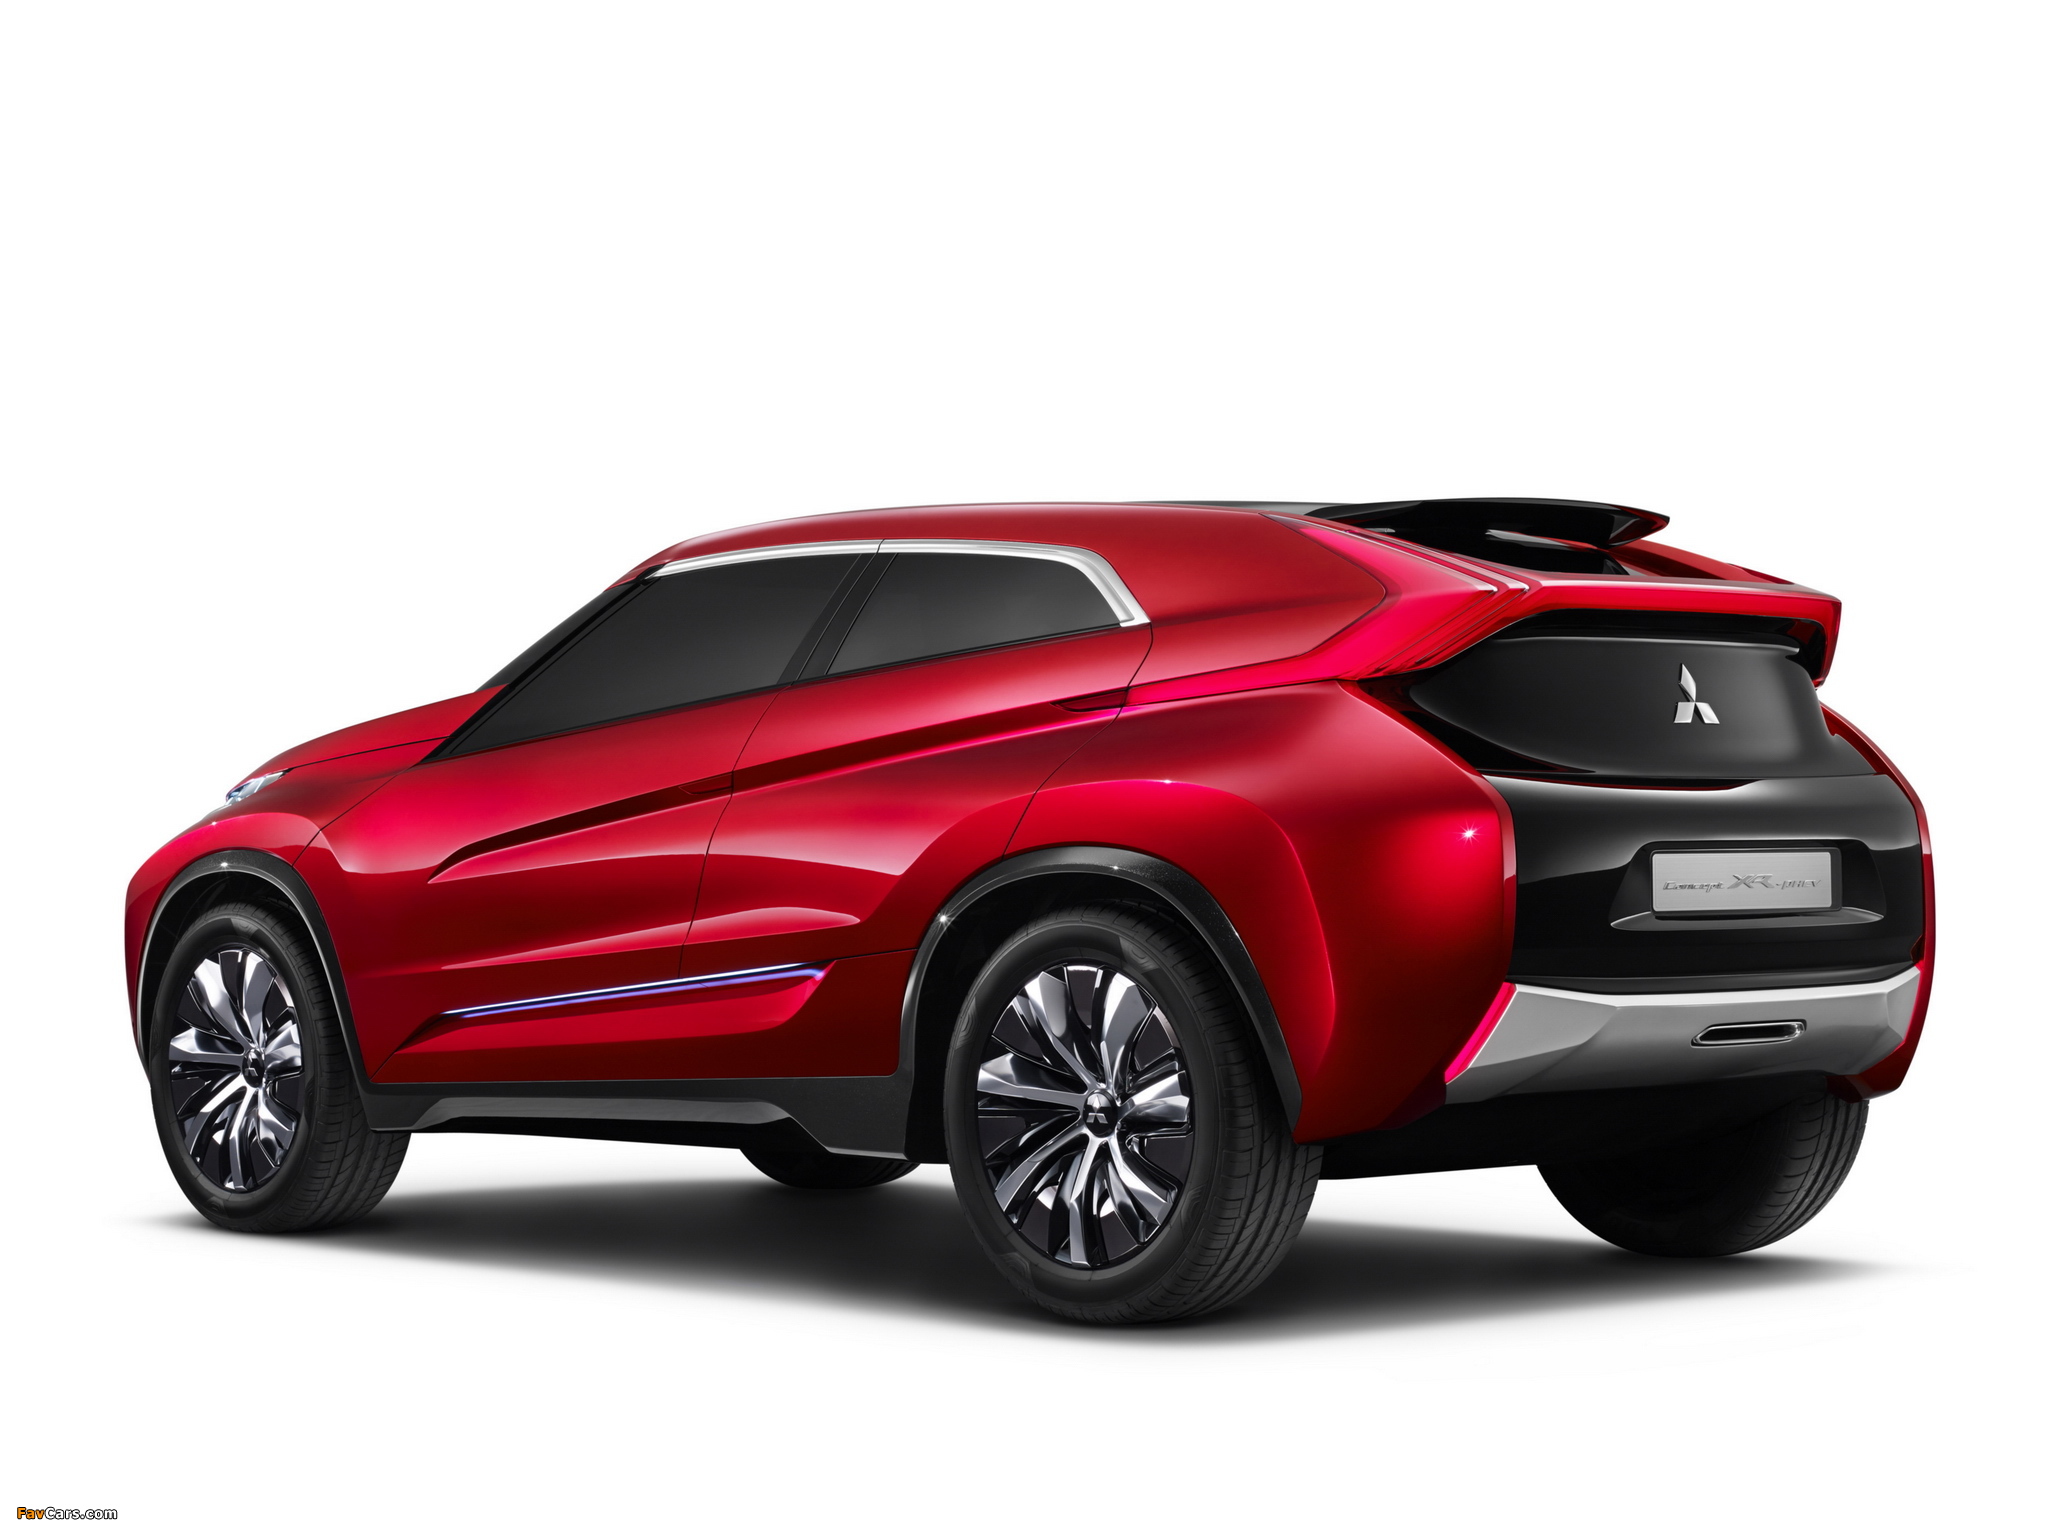 Mitsubishi Concept XR-PHEV 2013 pictures (2048 x 1536)